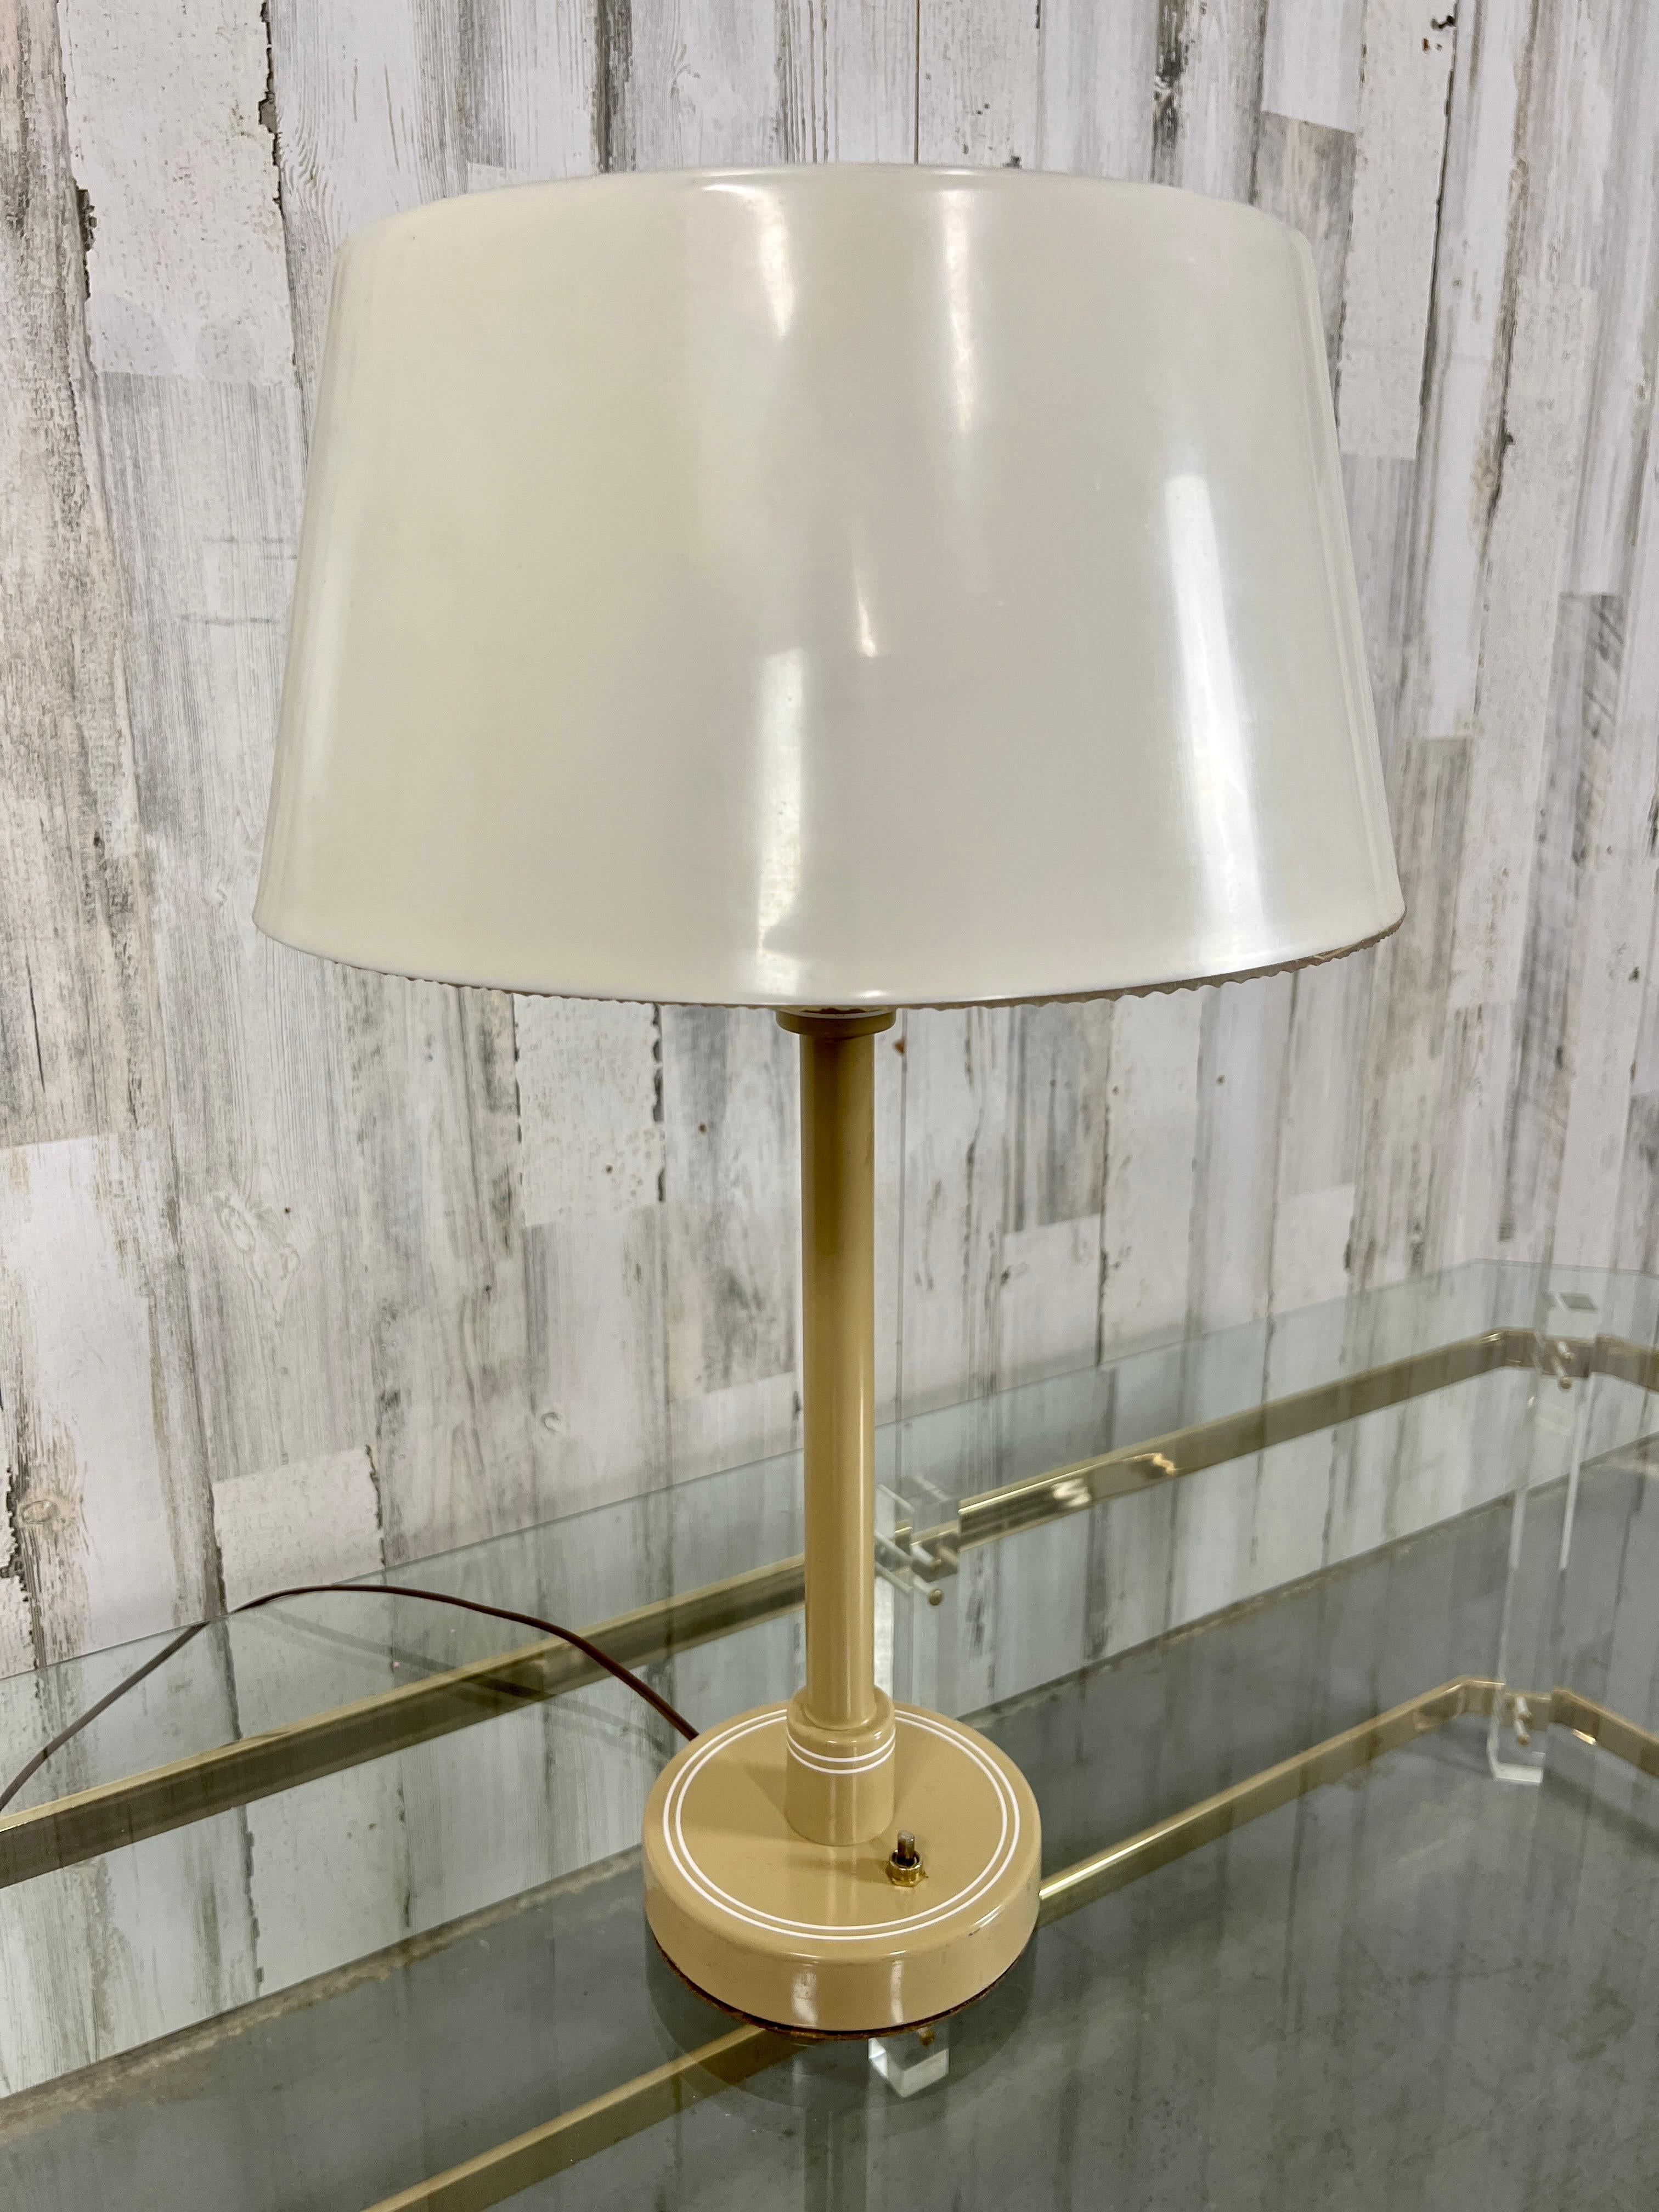 1960s Plastic Drum Shade Table Lamp In Good Condition For Sale In Denton, TX